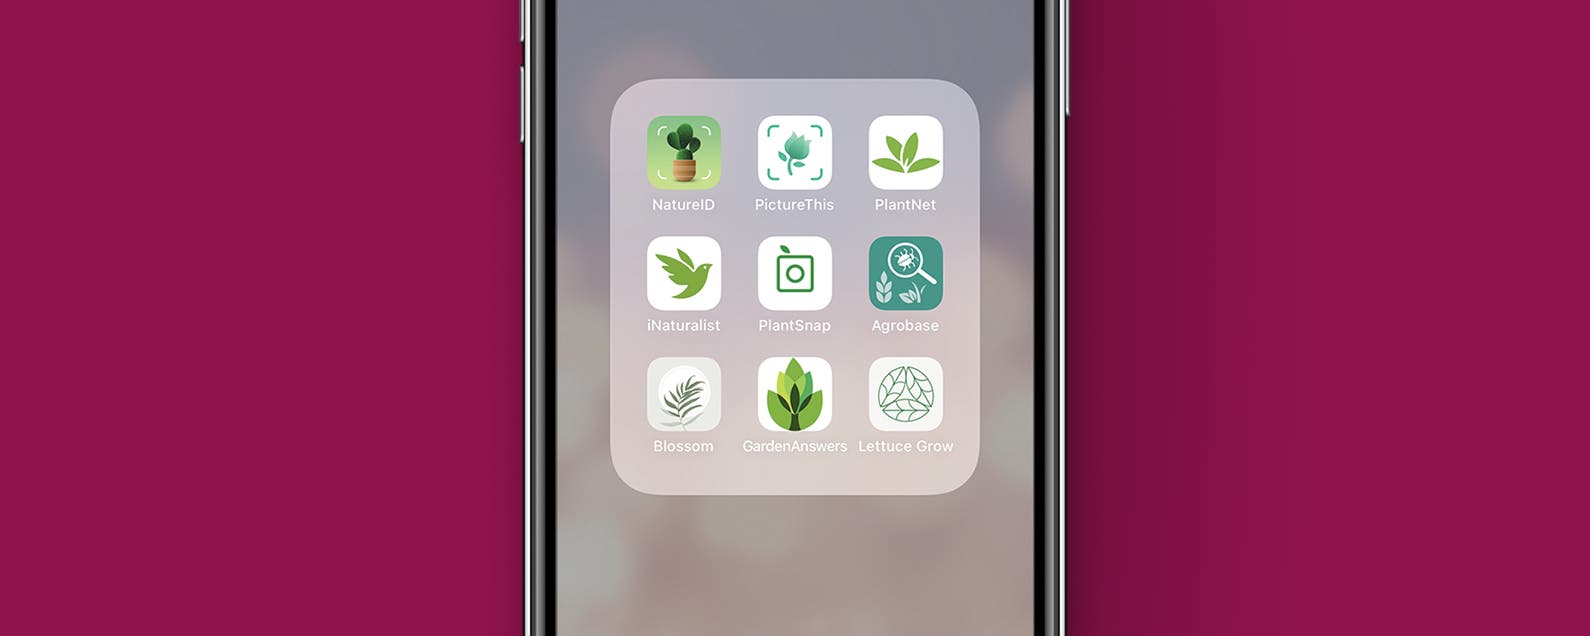 7 Best Plant Identification Apps for Your Home, Garden & Wild Plants